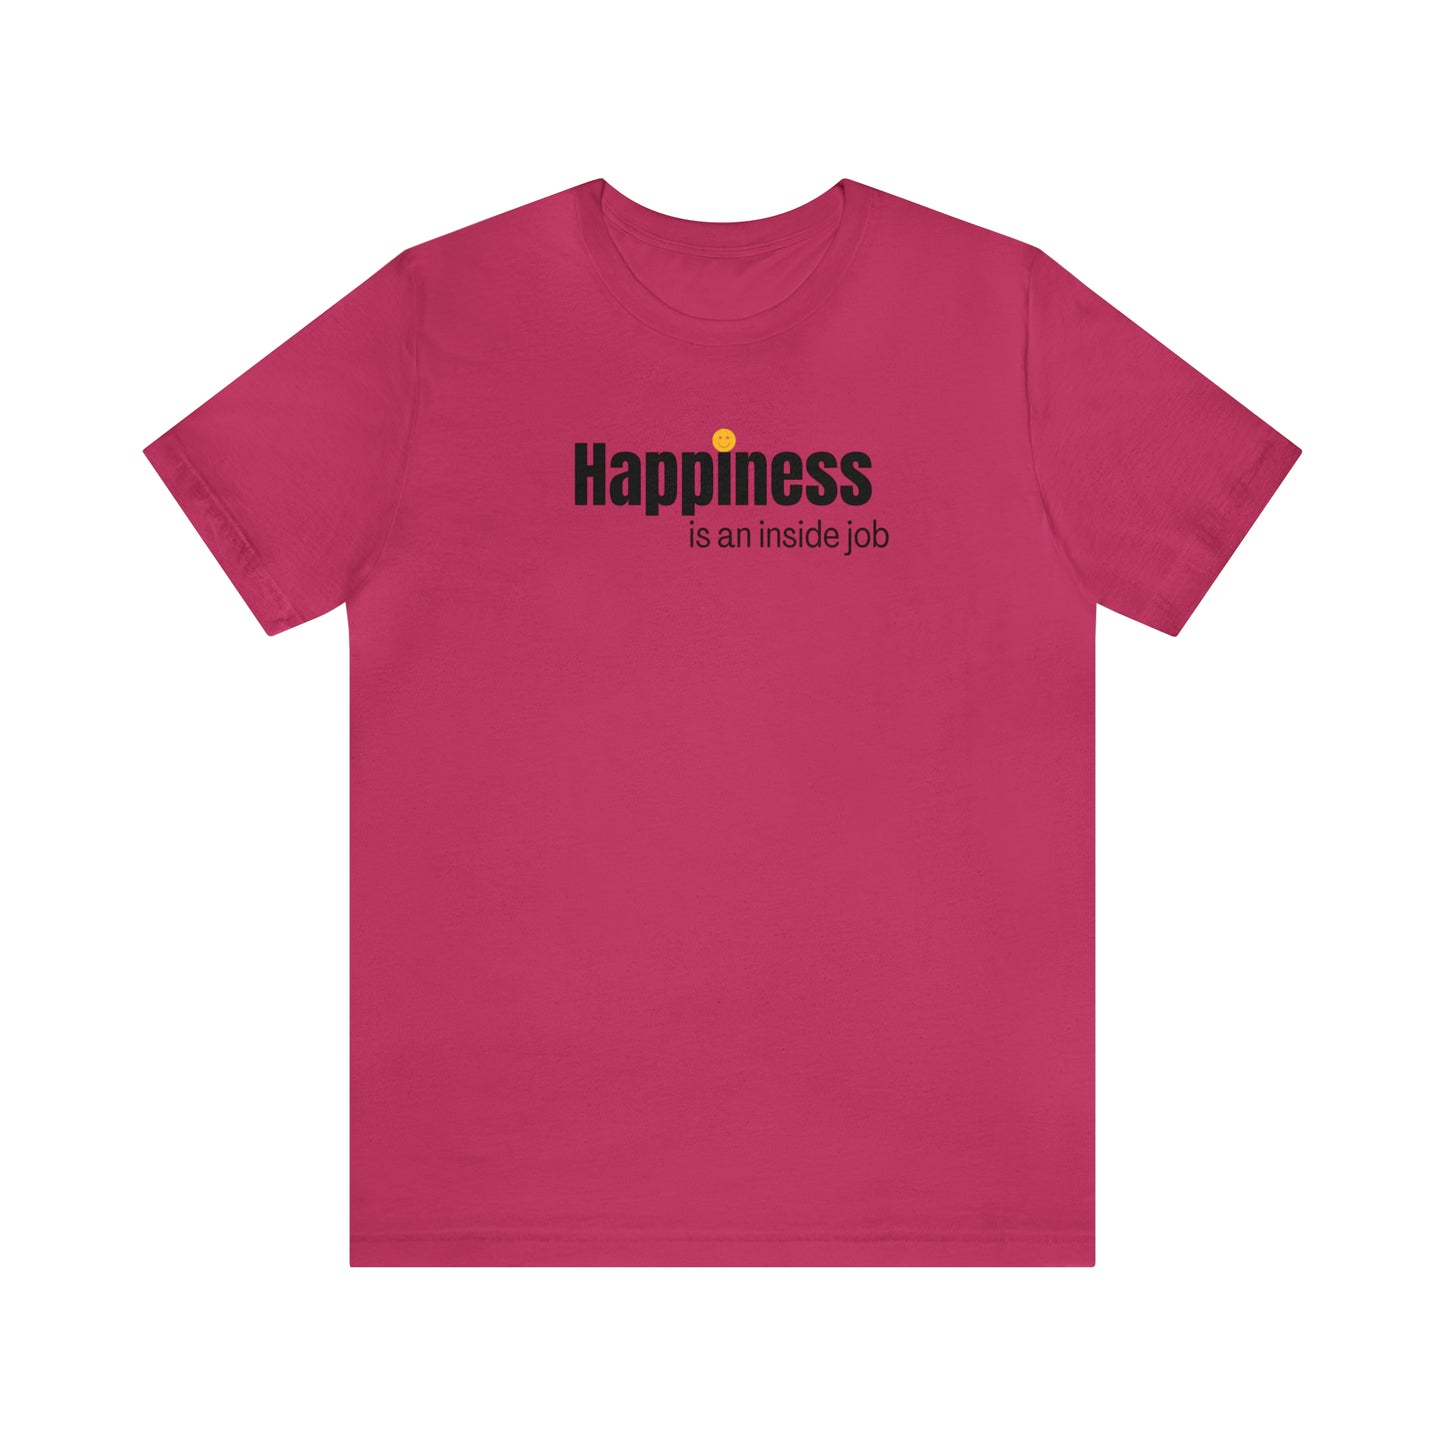 Happiness Adult Shirt for Self Love with Smiley Face - Embrace Your Diff